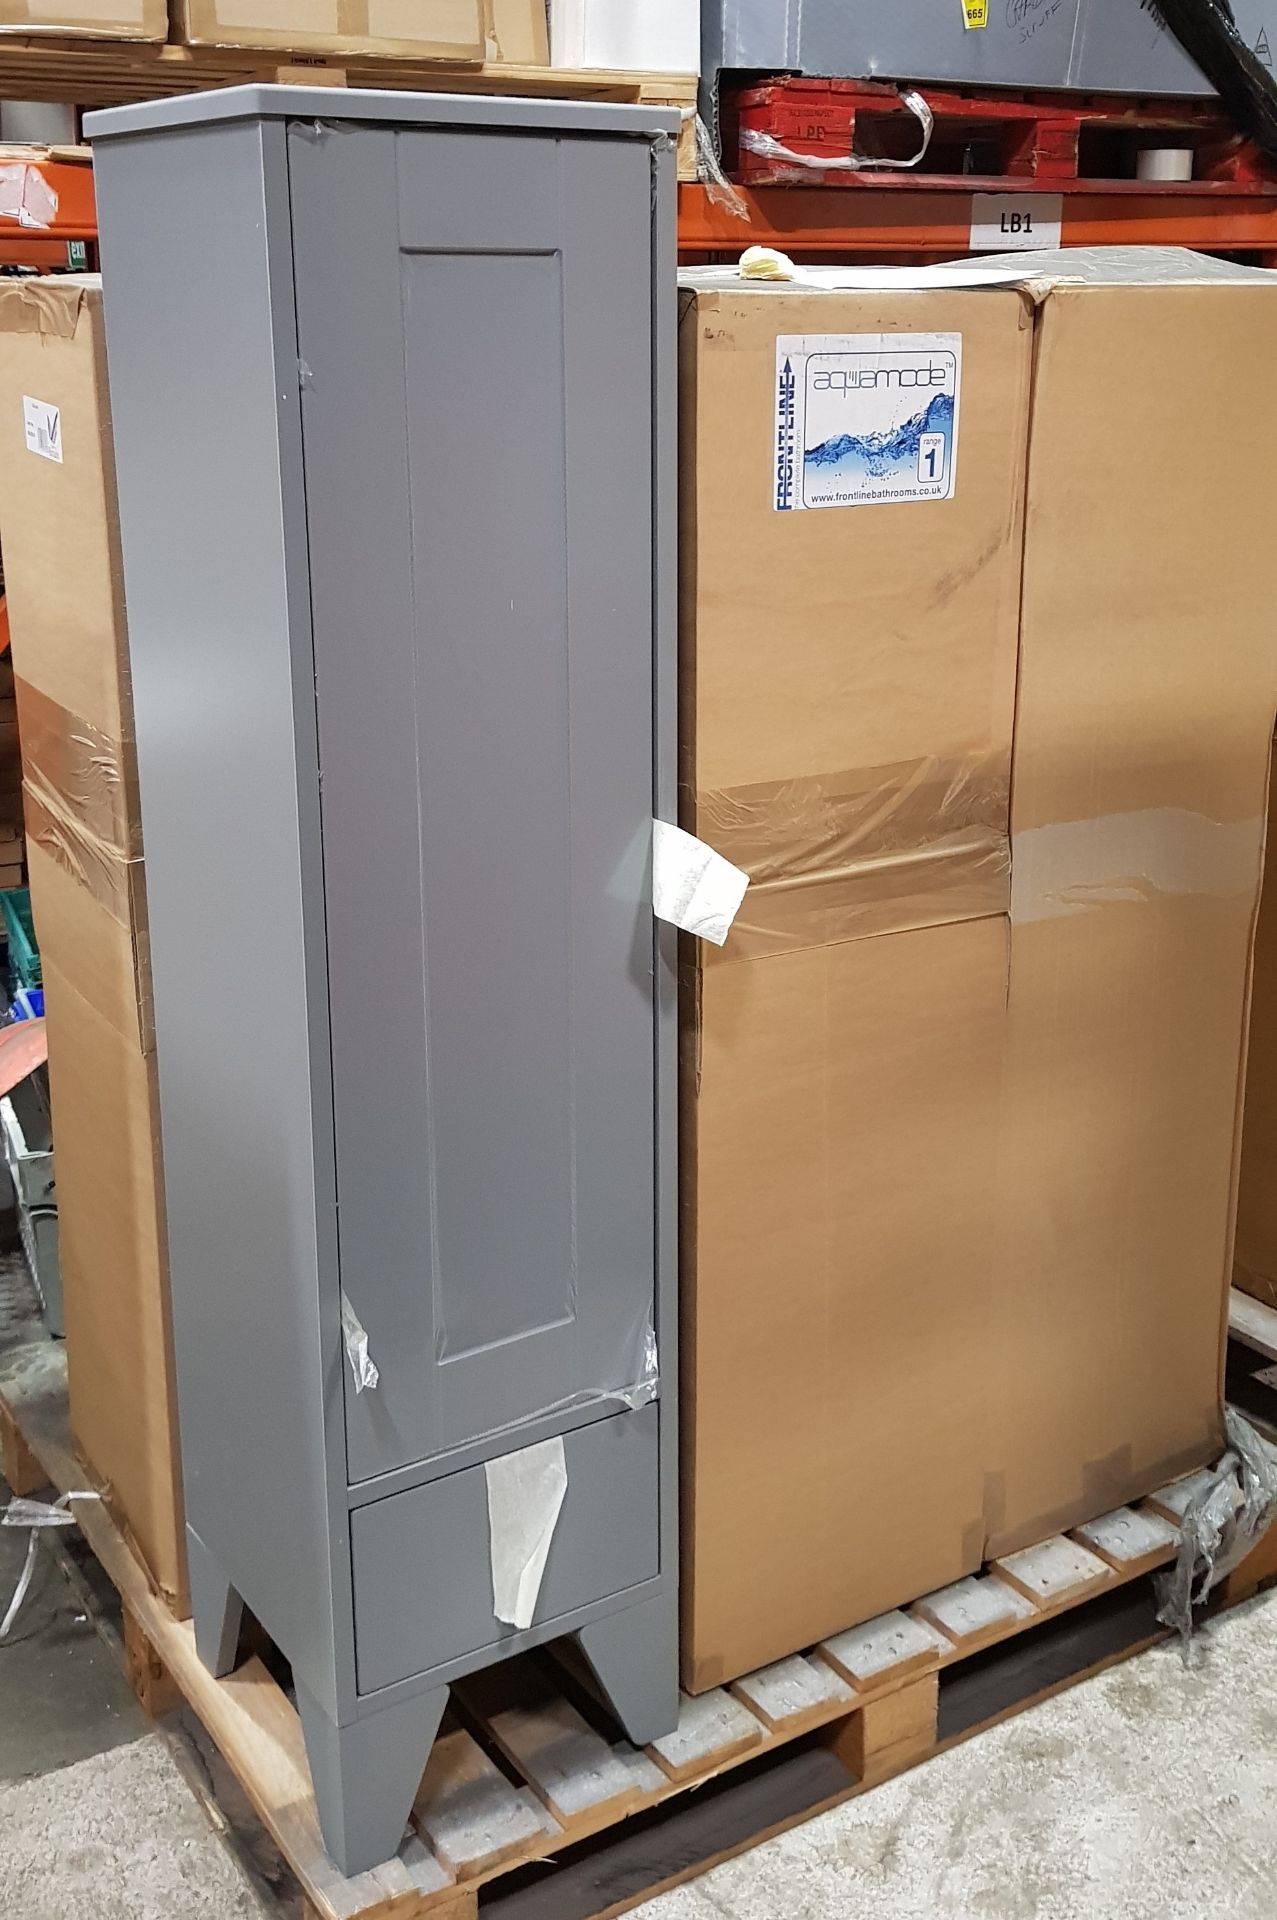 6 X BRAND NEW AQUAMODE TALL UNIT - IN DUST GREY COLOUR SIZE : HEIGHT 144 CM / WIDTH WIDTH 34.5